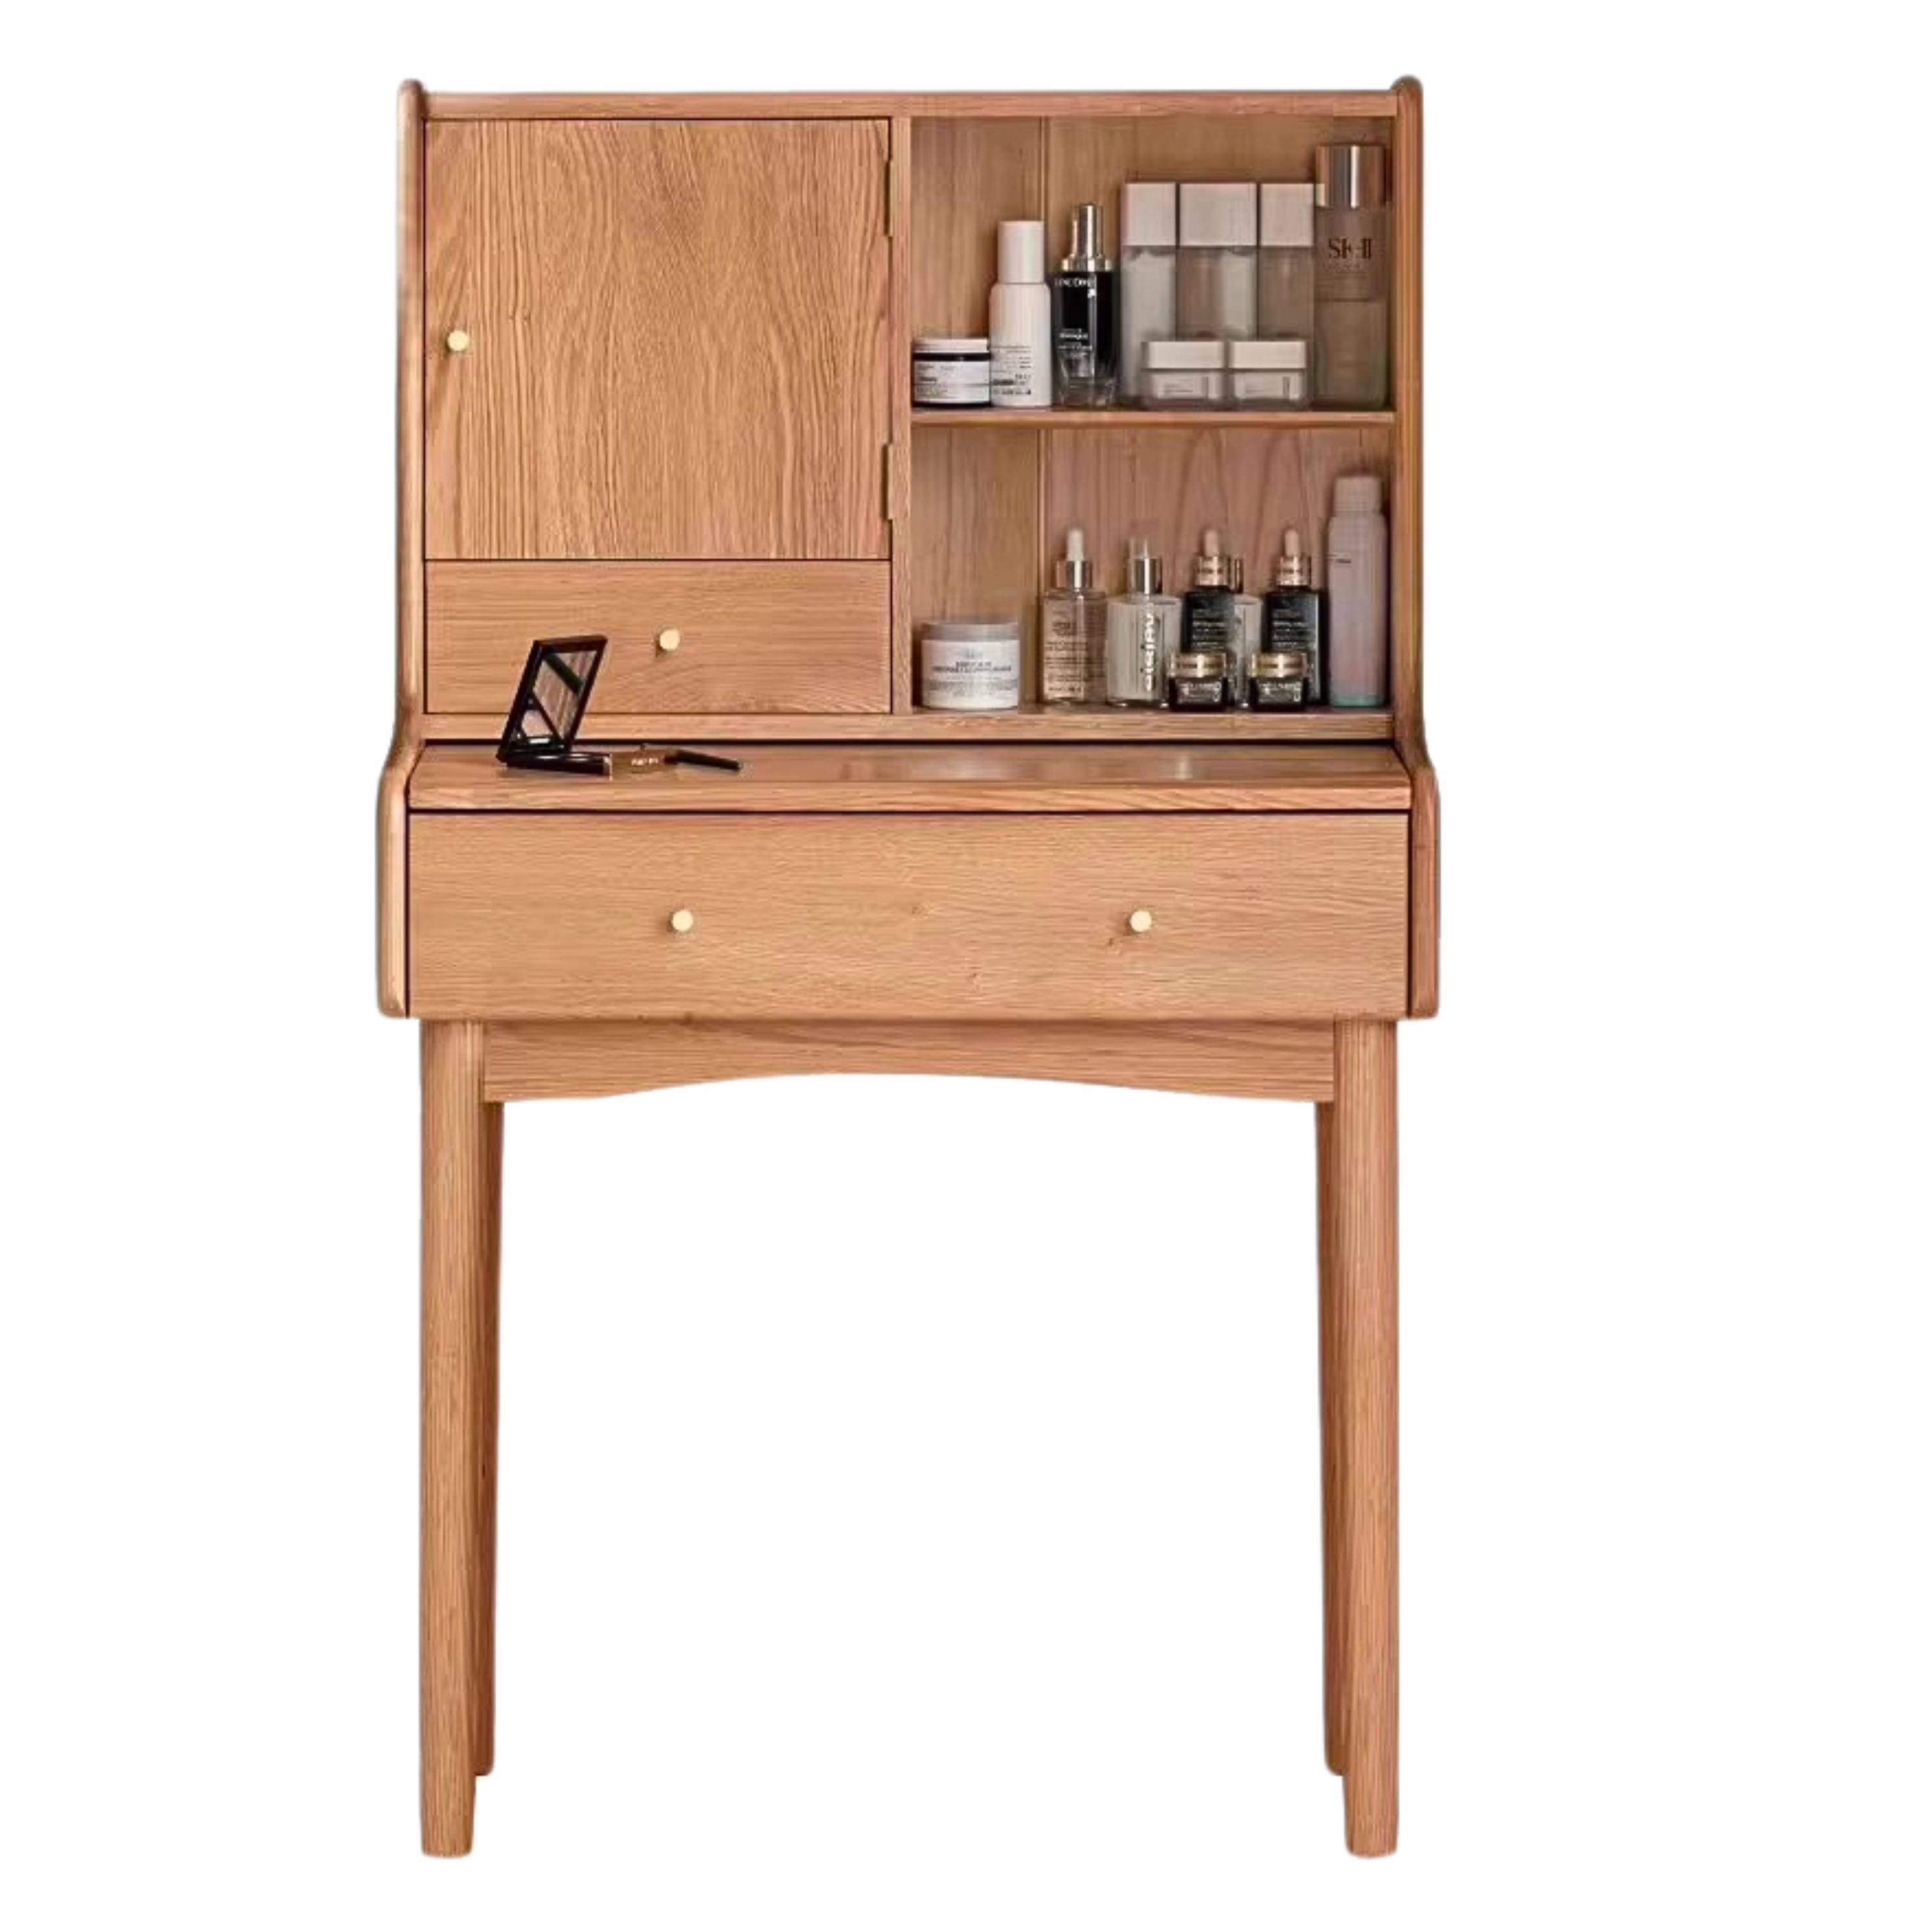 Oak solid wood Dressing table, makeup table